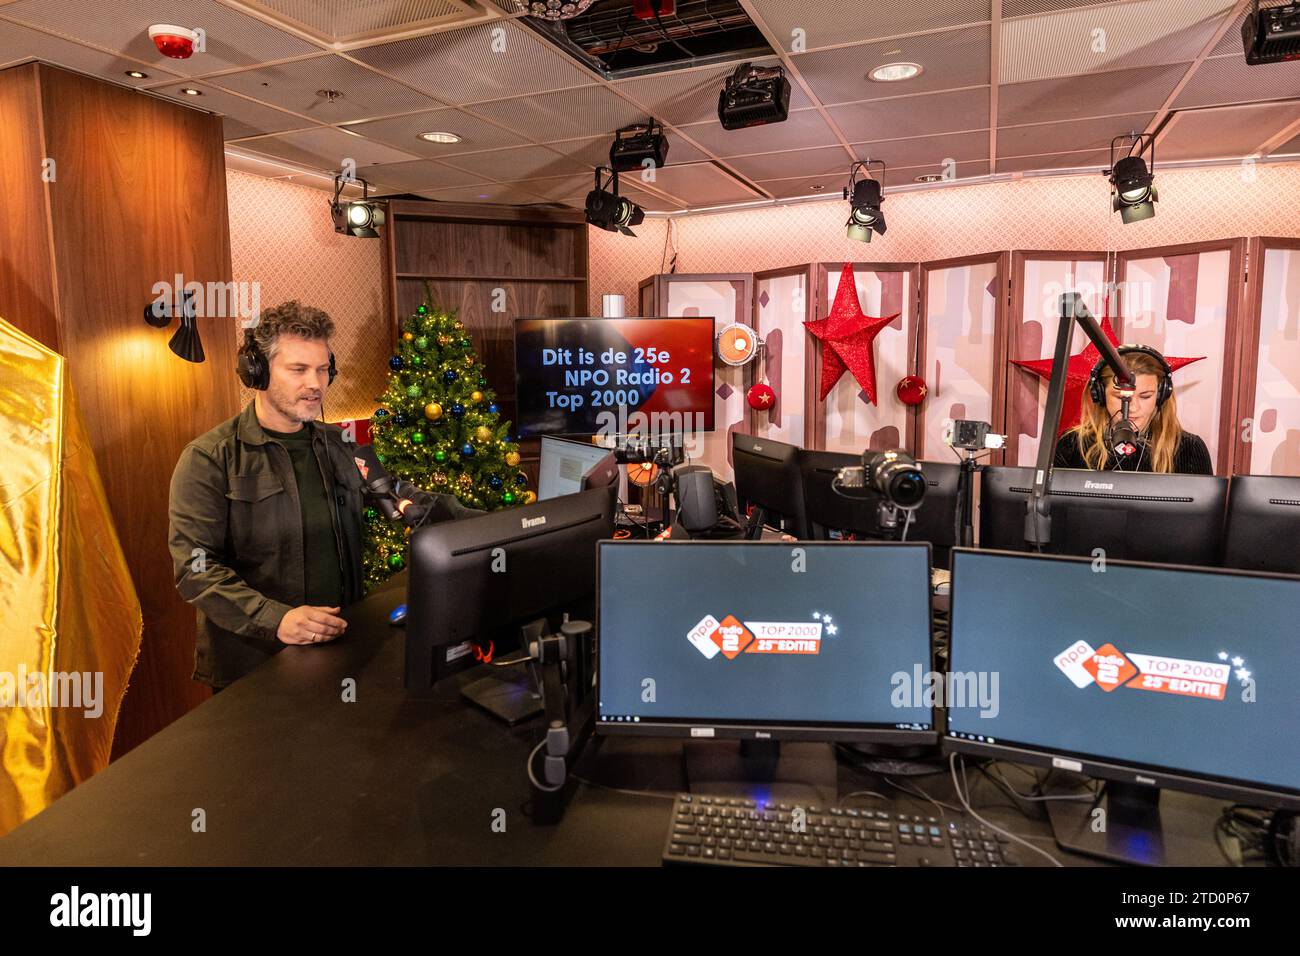 HILVERSUM - Paul Rabbering and Annemieke Schollaardt during the announcement of the Top 2000 list of NPO Radio 2. ANP LEVIN DEN BOER netherlands out - belgium out Credit: ANP/Alamy Live News Stock Photo